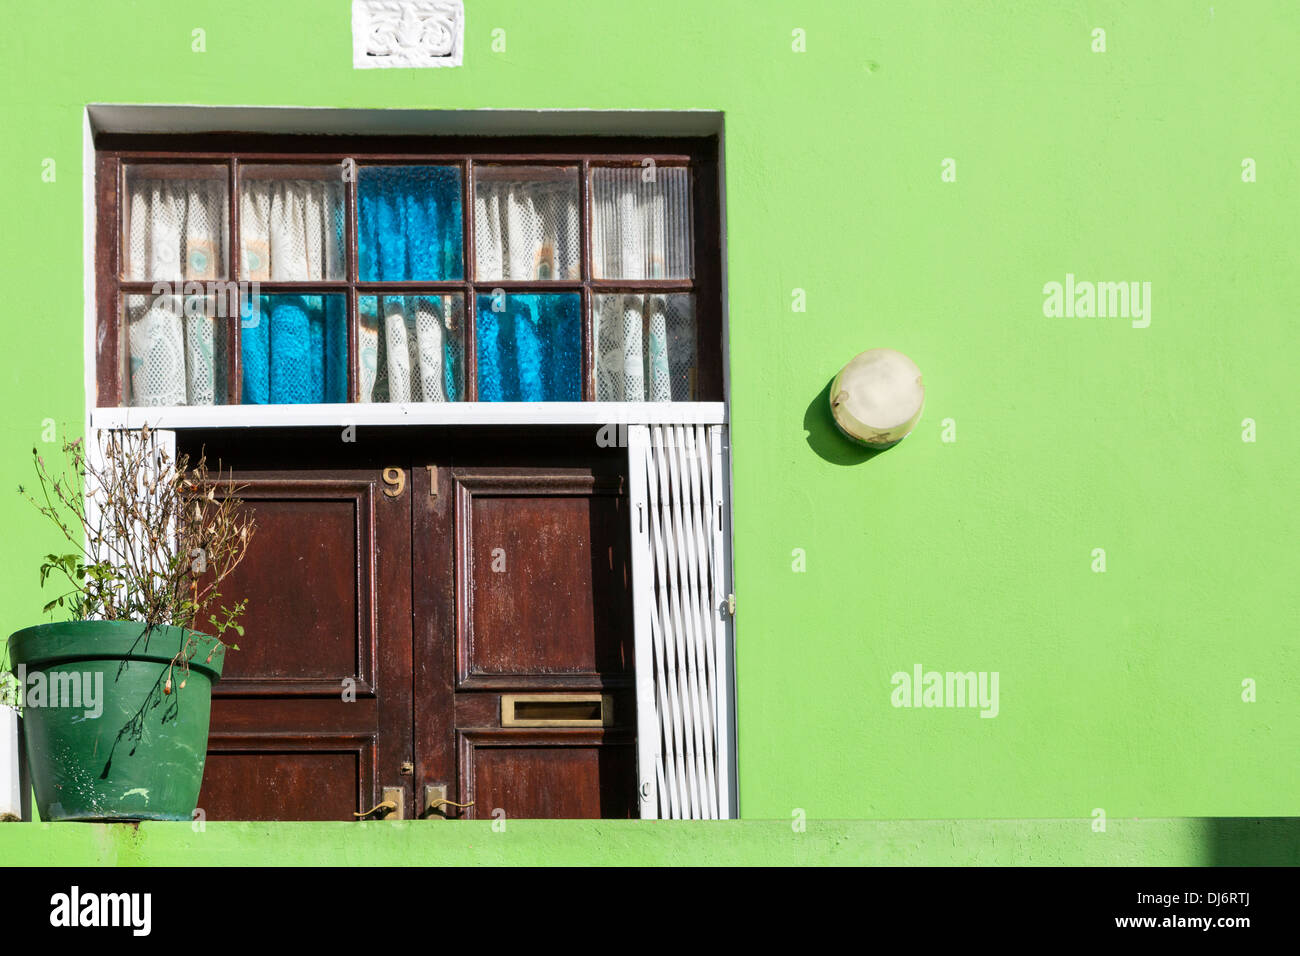 South Africa, Cape Town, Bo-kaap. Doorway to Private House. Stock Photo